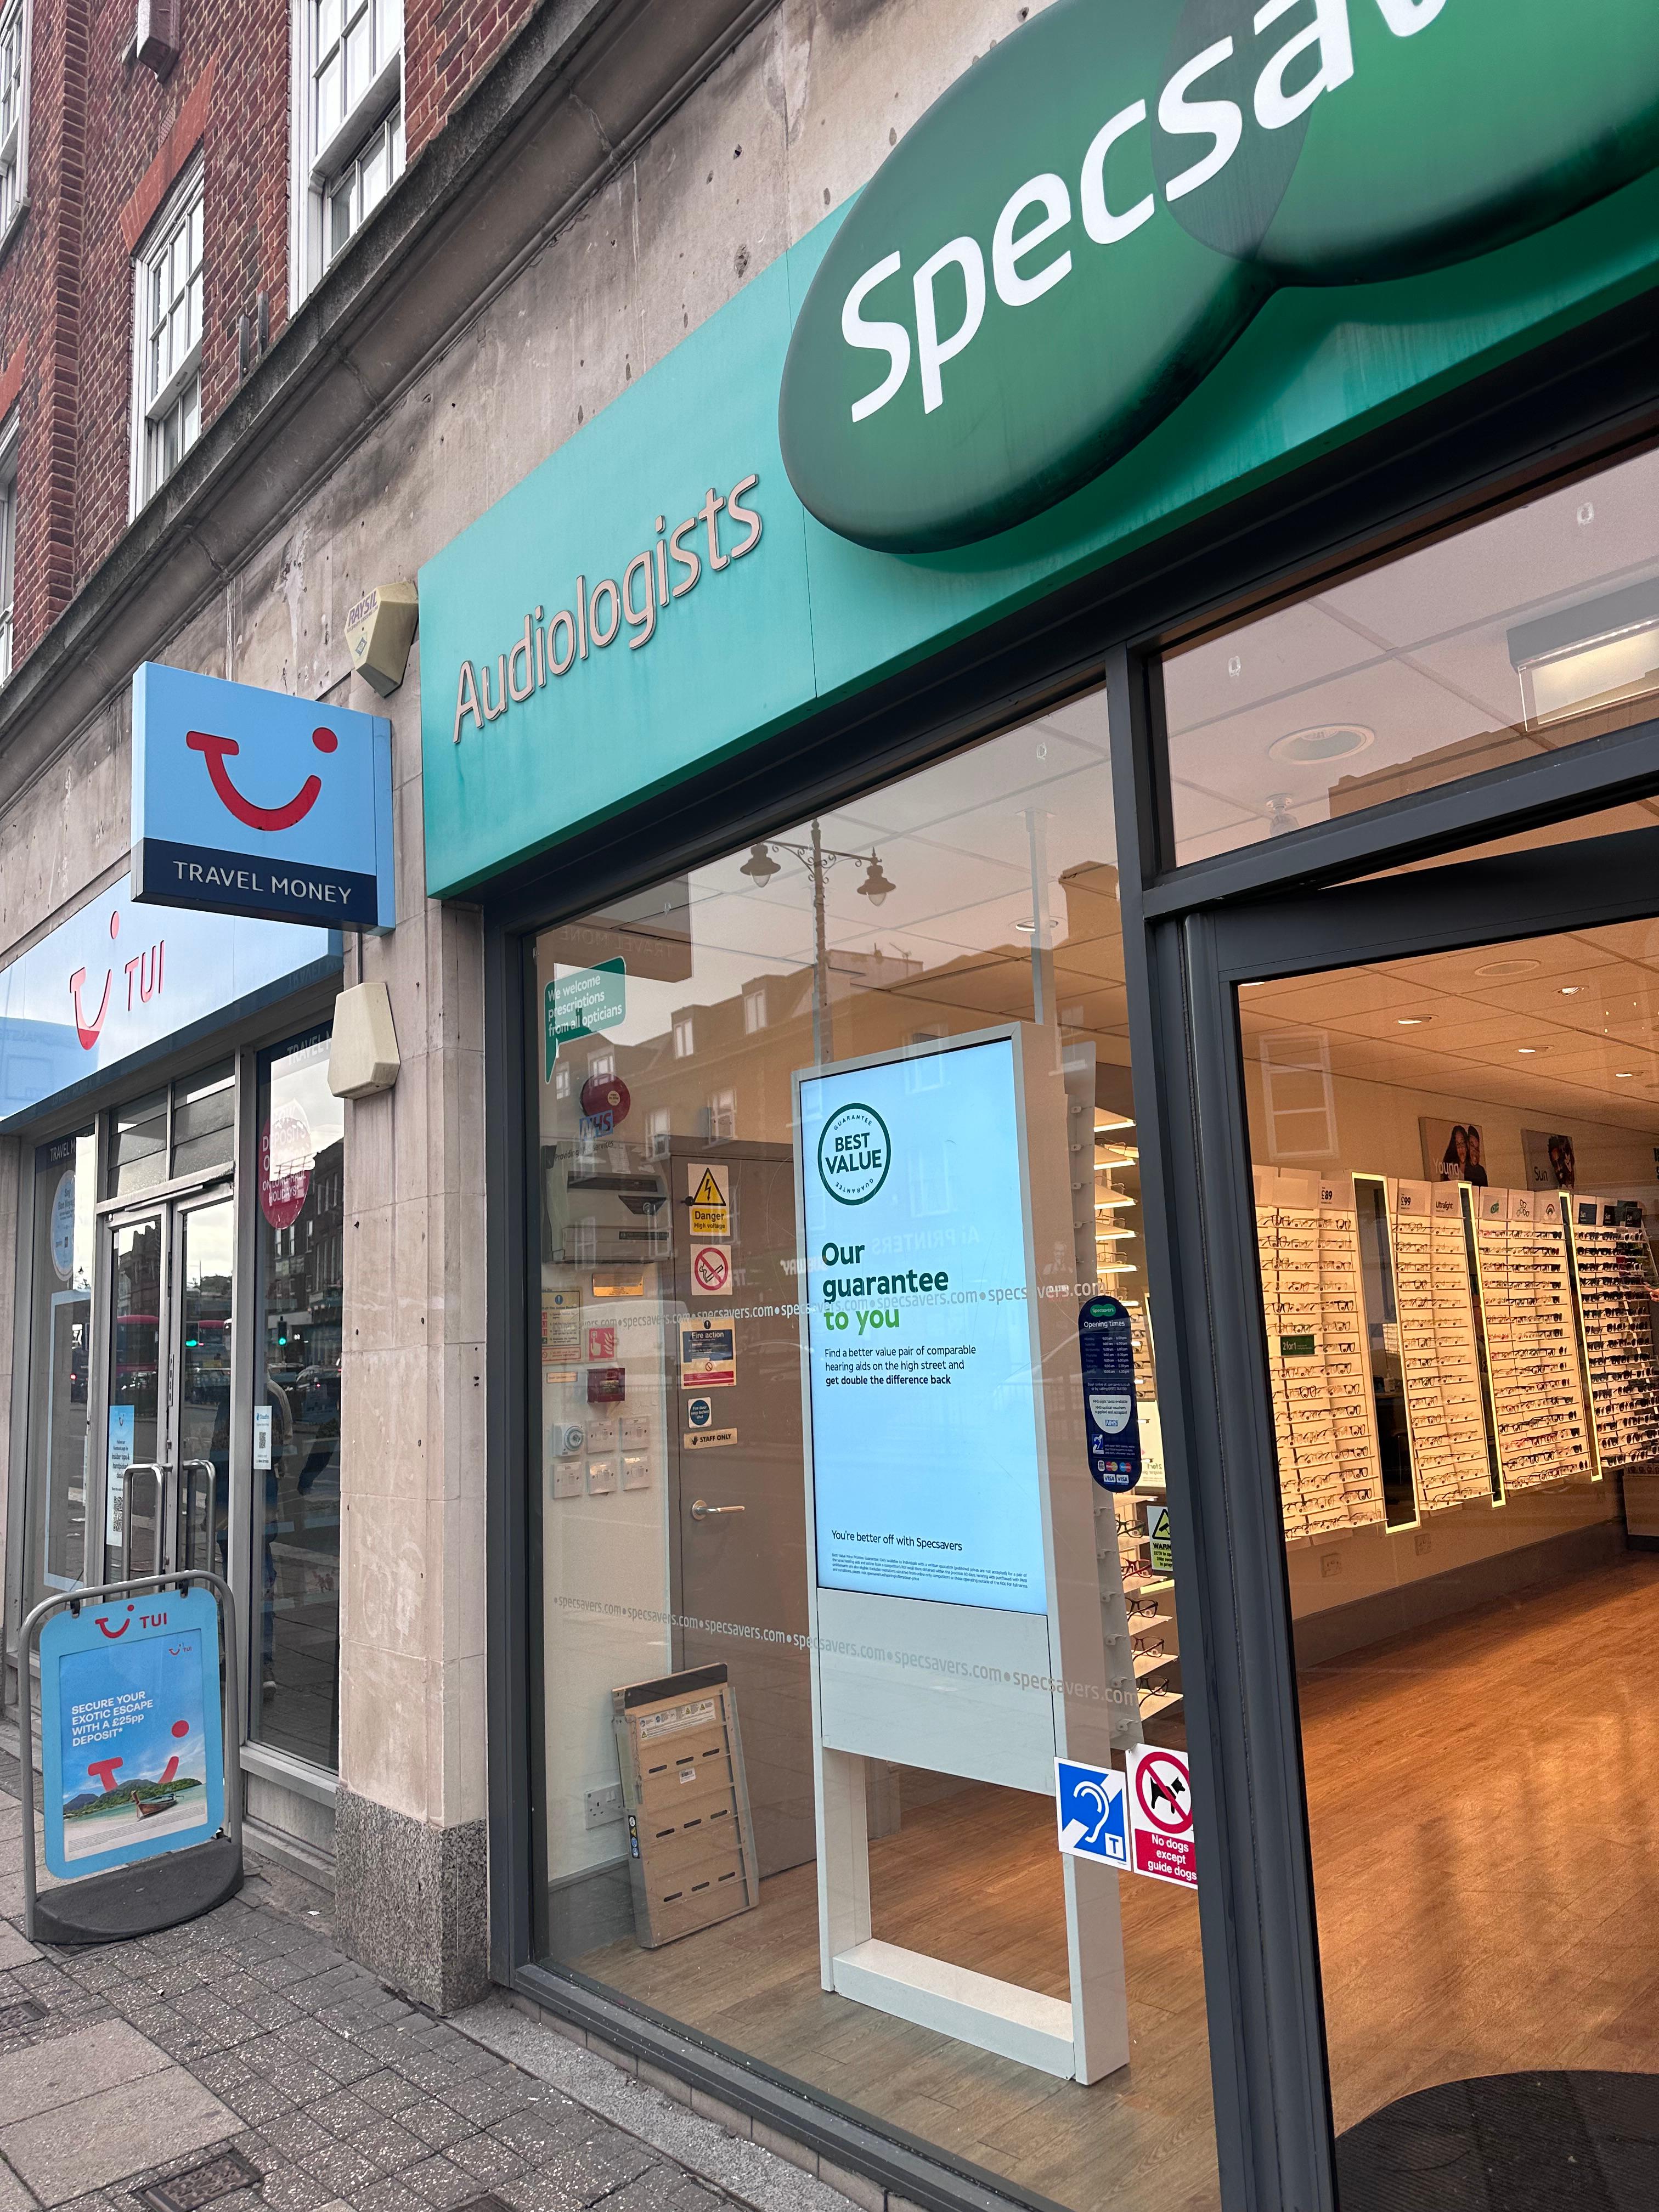 Images Specsavers Opticians and Audiologists - Epsom